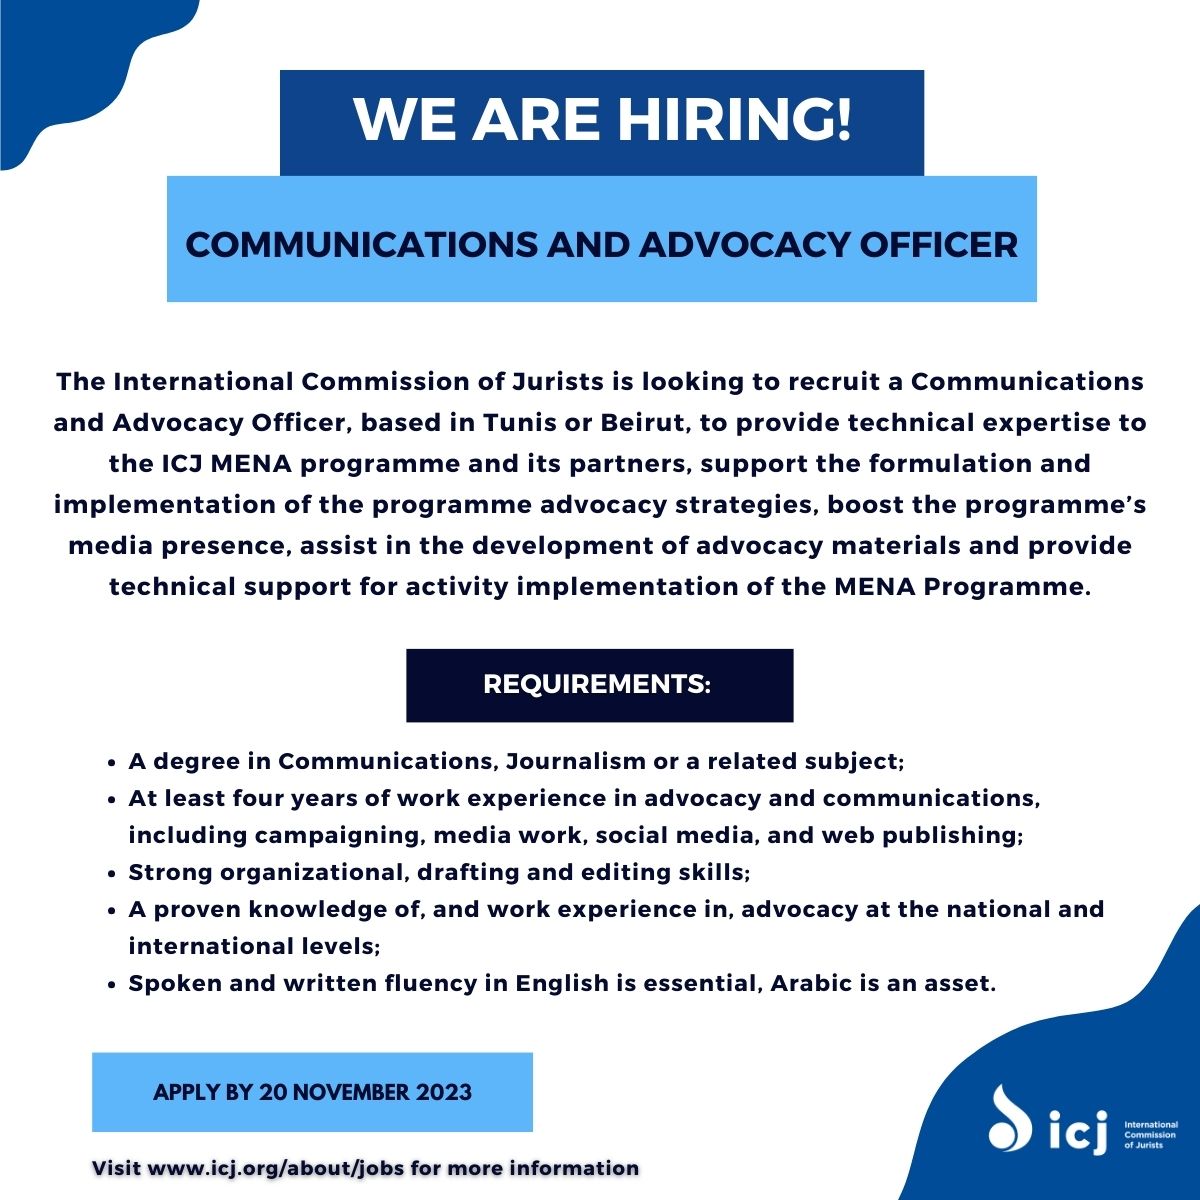 #JoinUs! Our @ICJ_MENA programme is looking to recruit a Comms & Advocacy Officer to boost its media presence and contribute to formulating and implementing impactful advocacy strategies. Don't miss out on this exciting #JobOpportunity! Visit our website for more information.